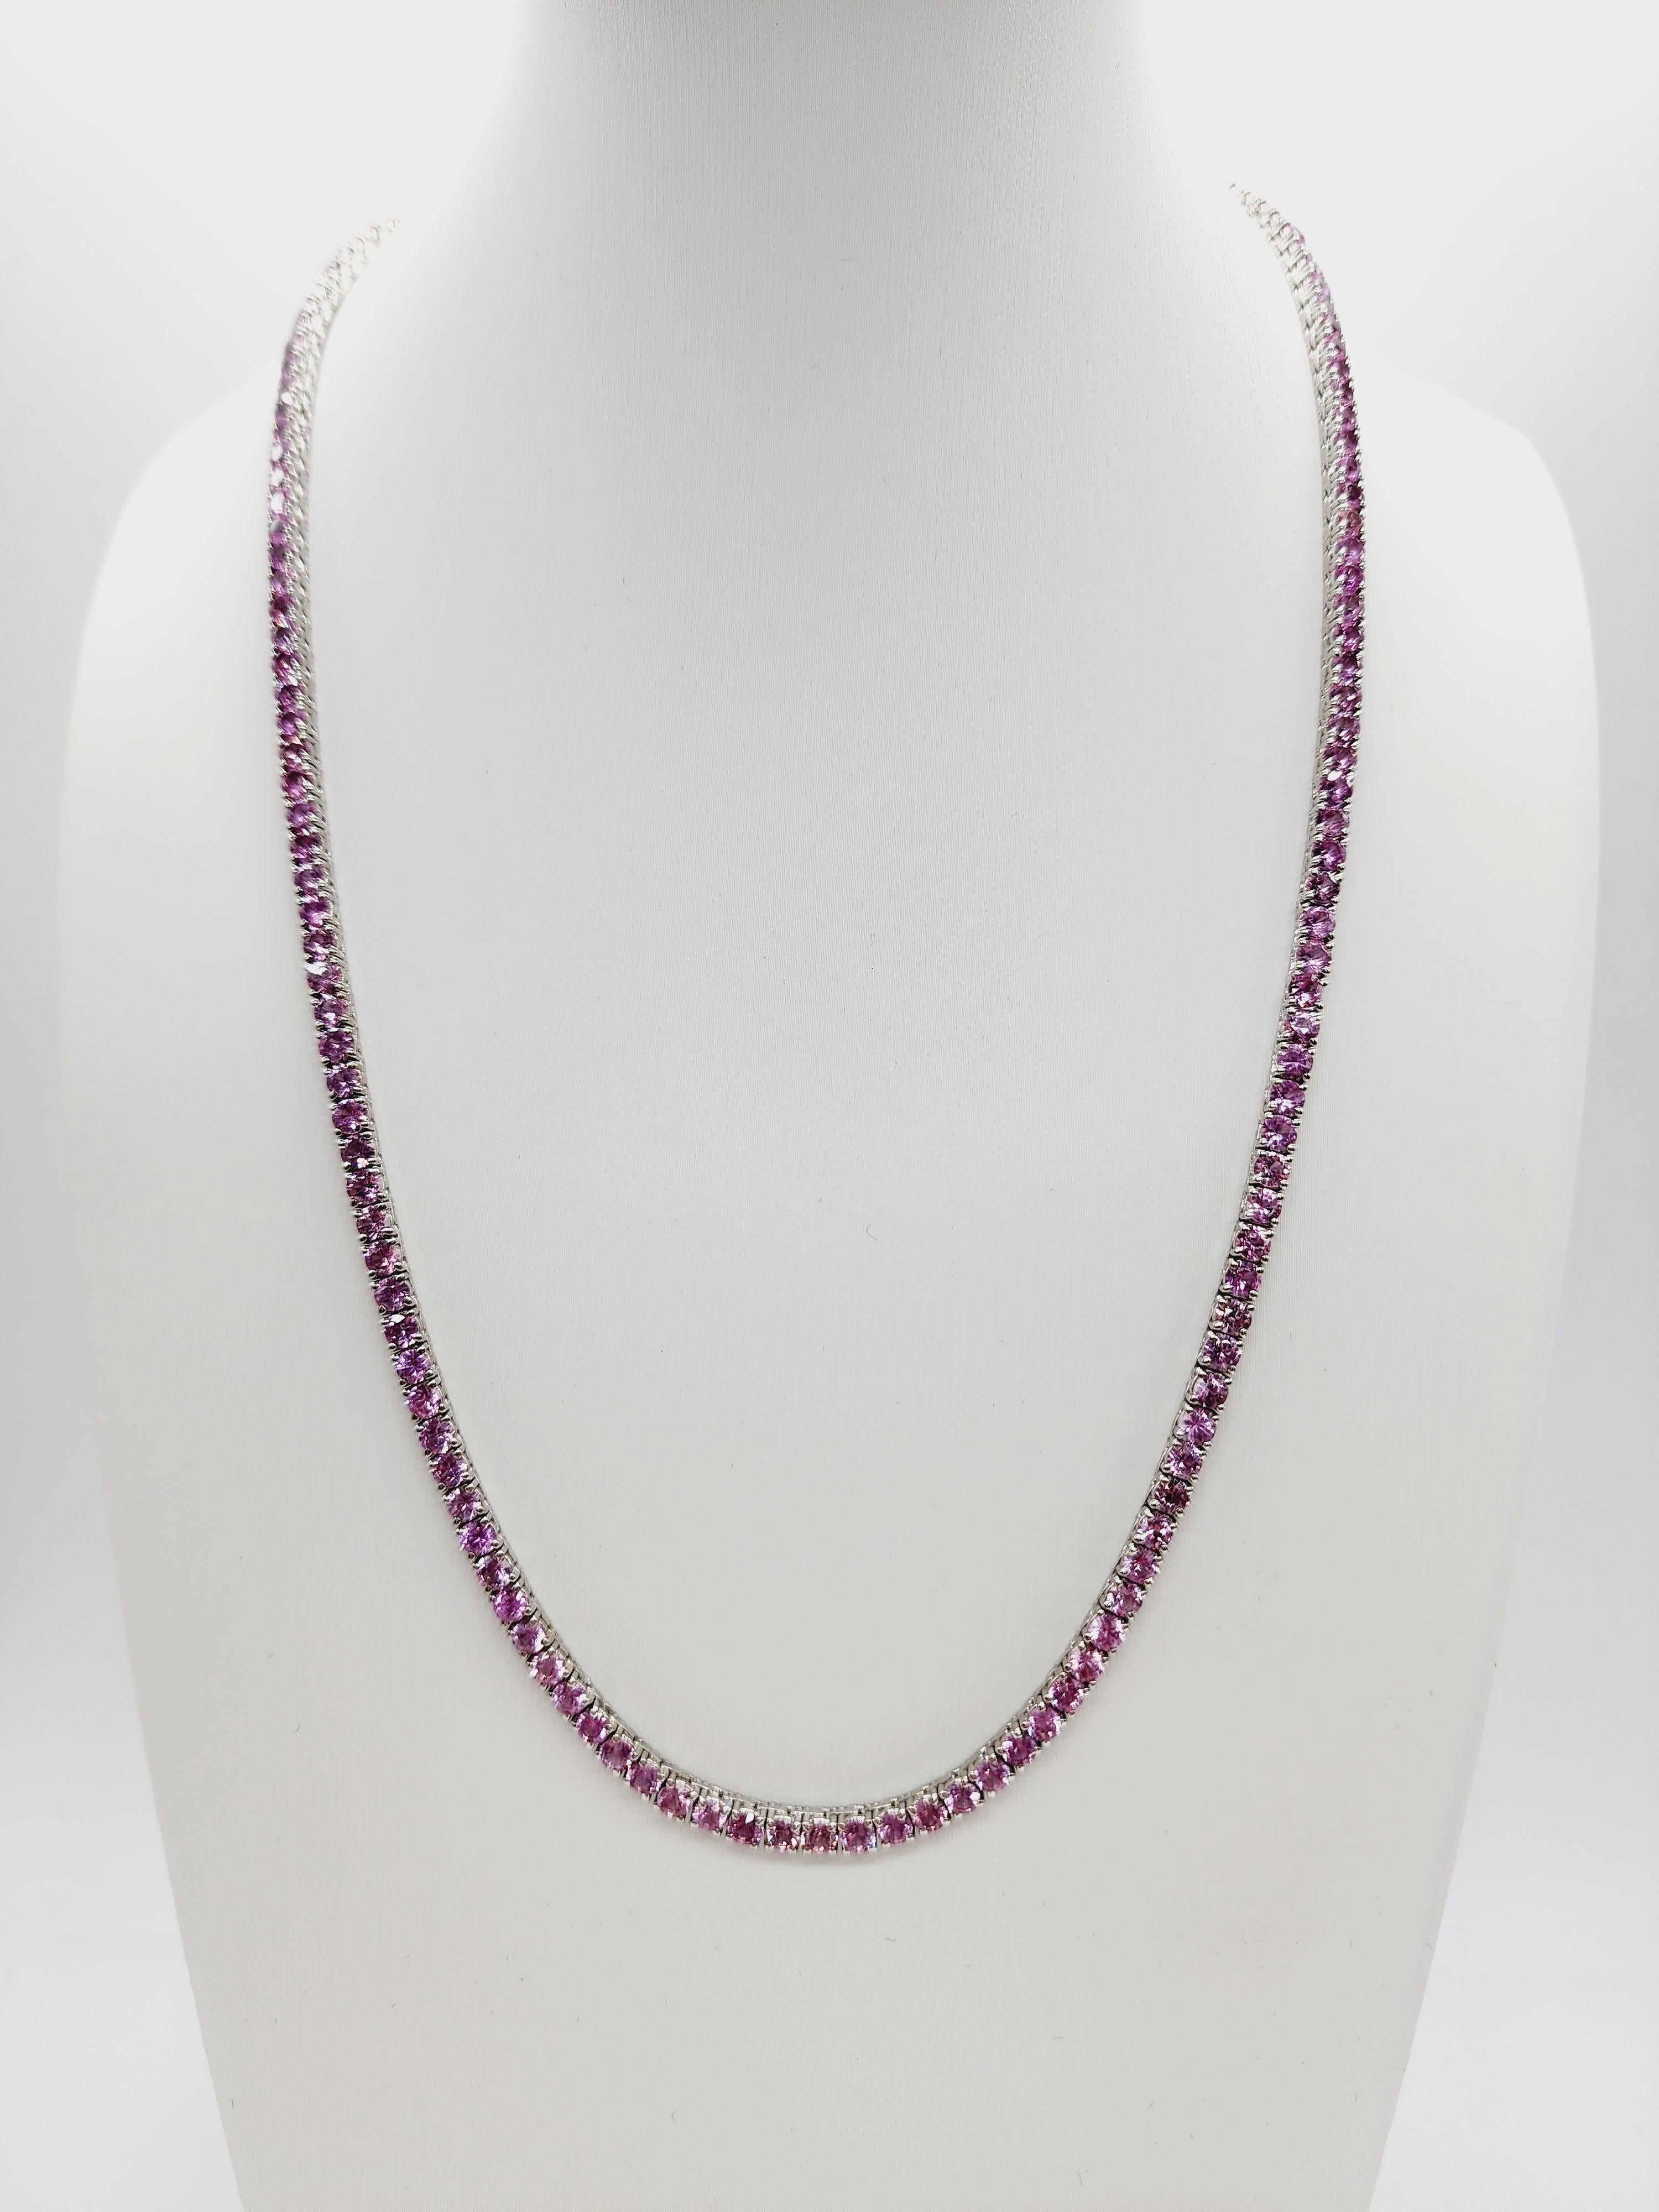 21 CARATS NATURAL PINK SAPPHIRE TENNIS NECKLACE WHITE GOLD 14K
20 INCH. 3.2MM WIDE. 

All sapphire are natural, not treated.

*Free shipping within the U.S.*